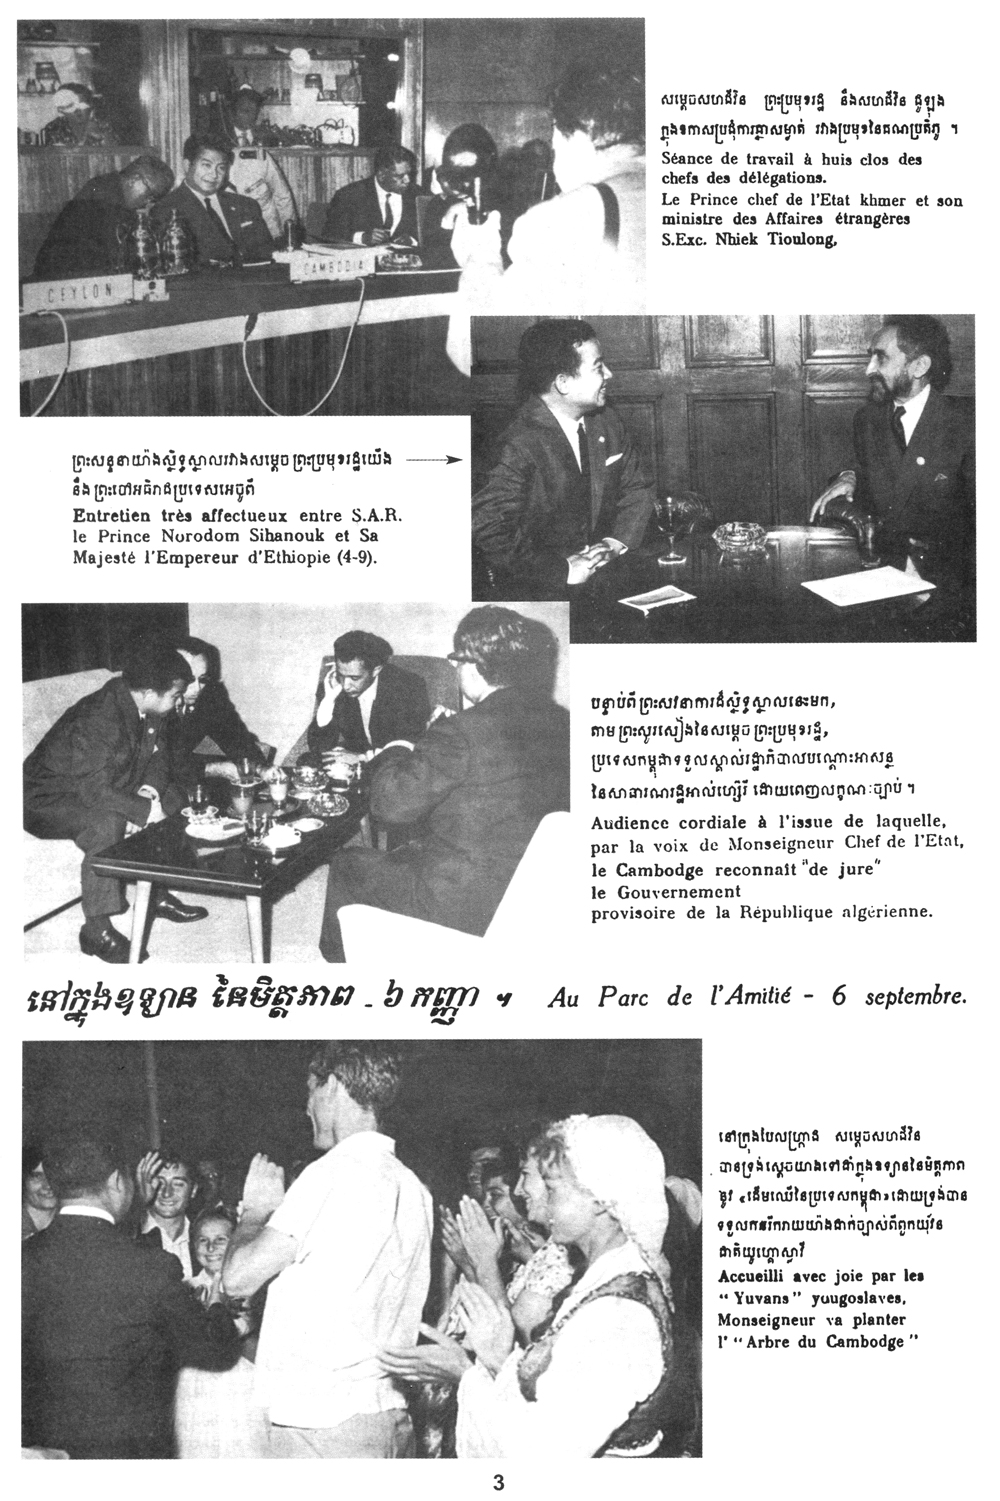 All/document/Documents/Divers/Histoire/id2272/photo003.jpg